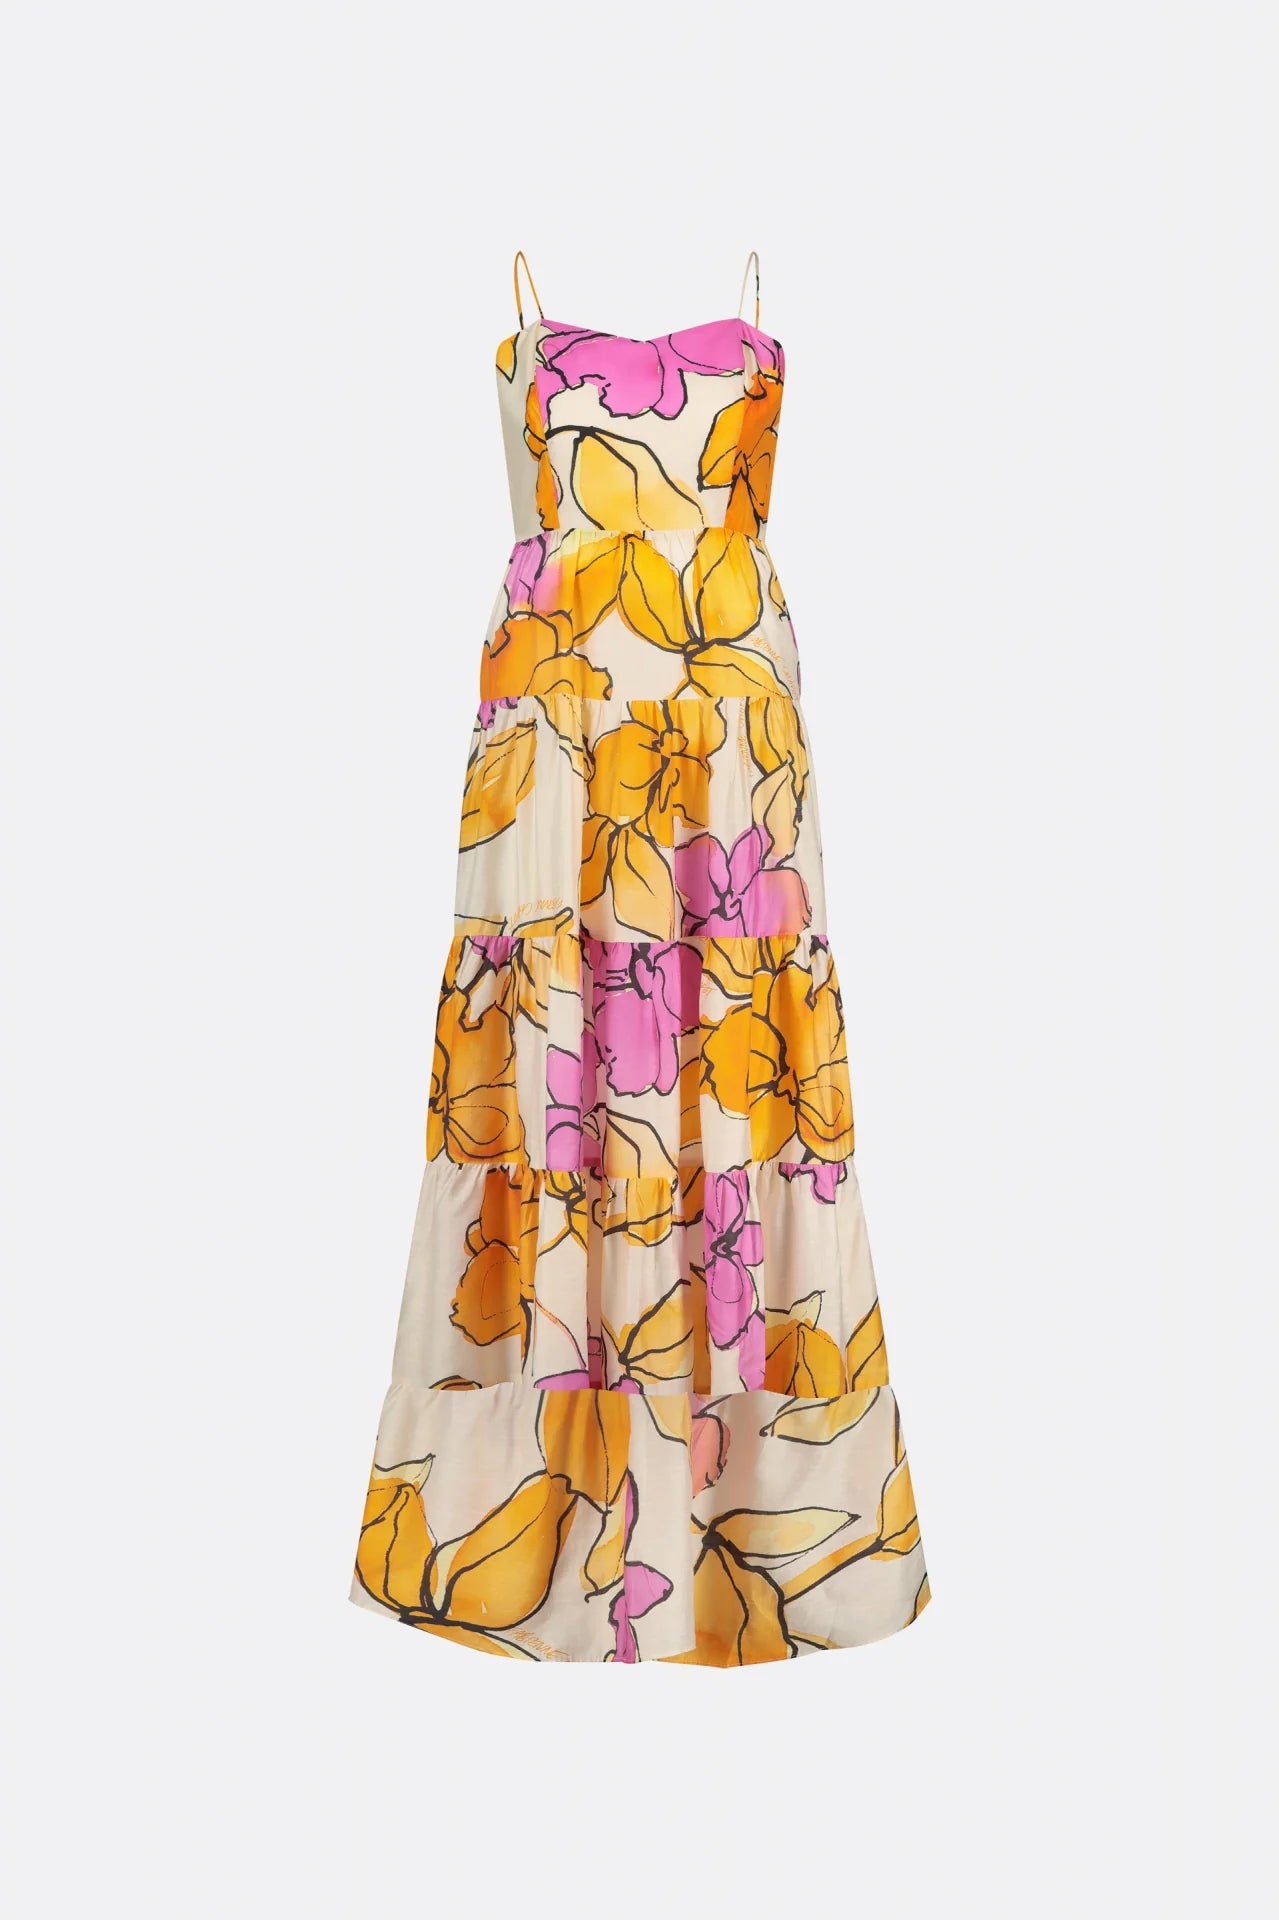 Maxi dress with thin straps in orange and pink floral print